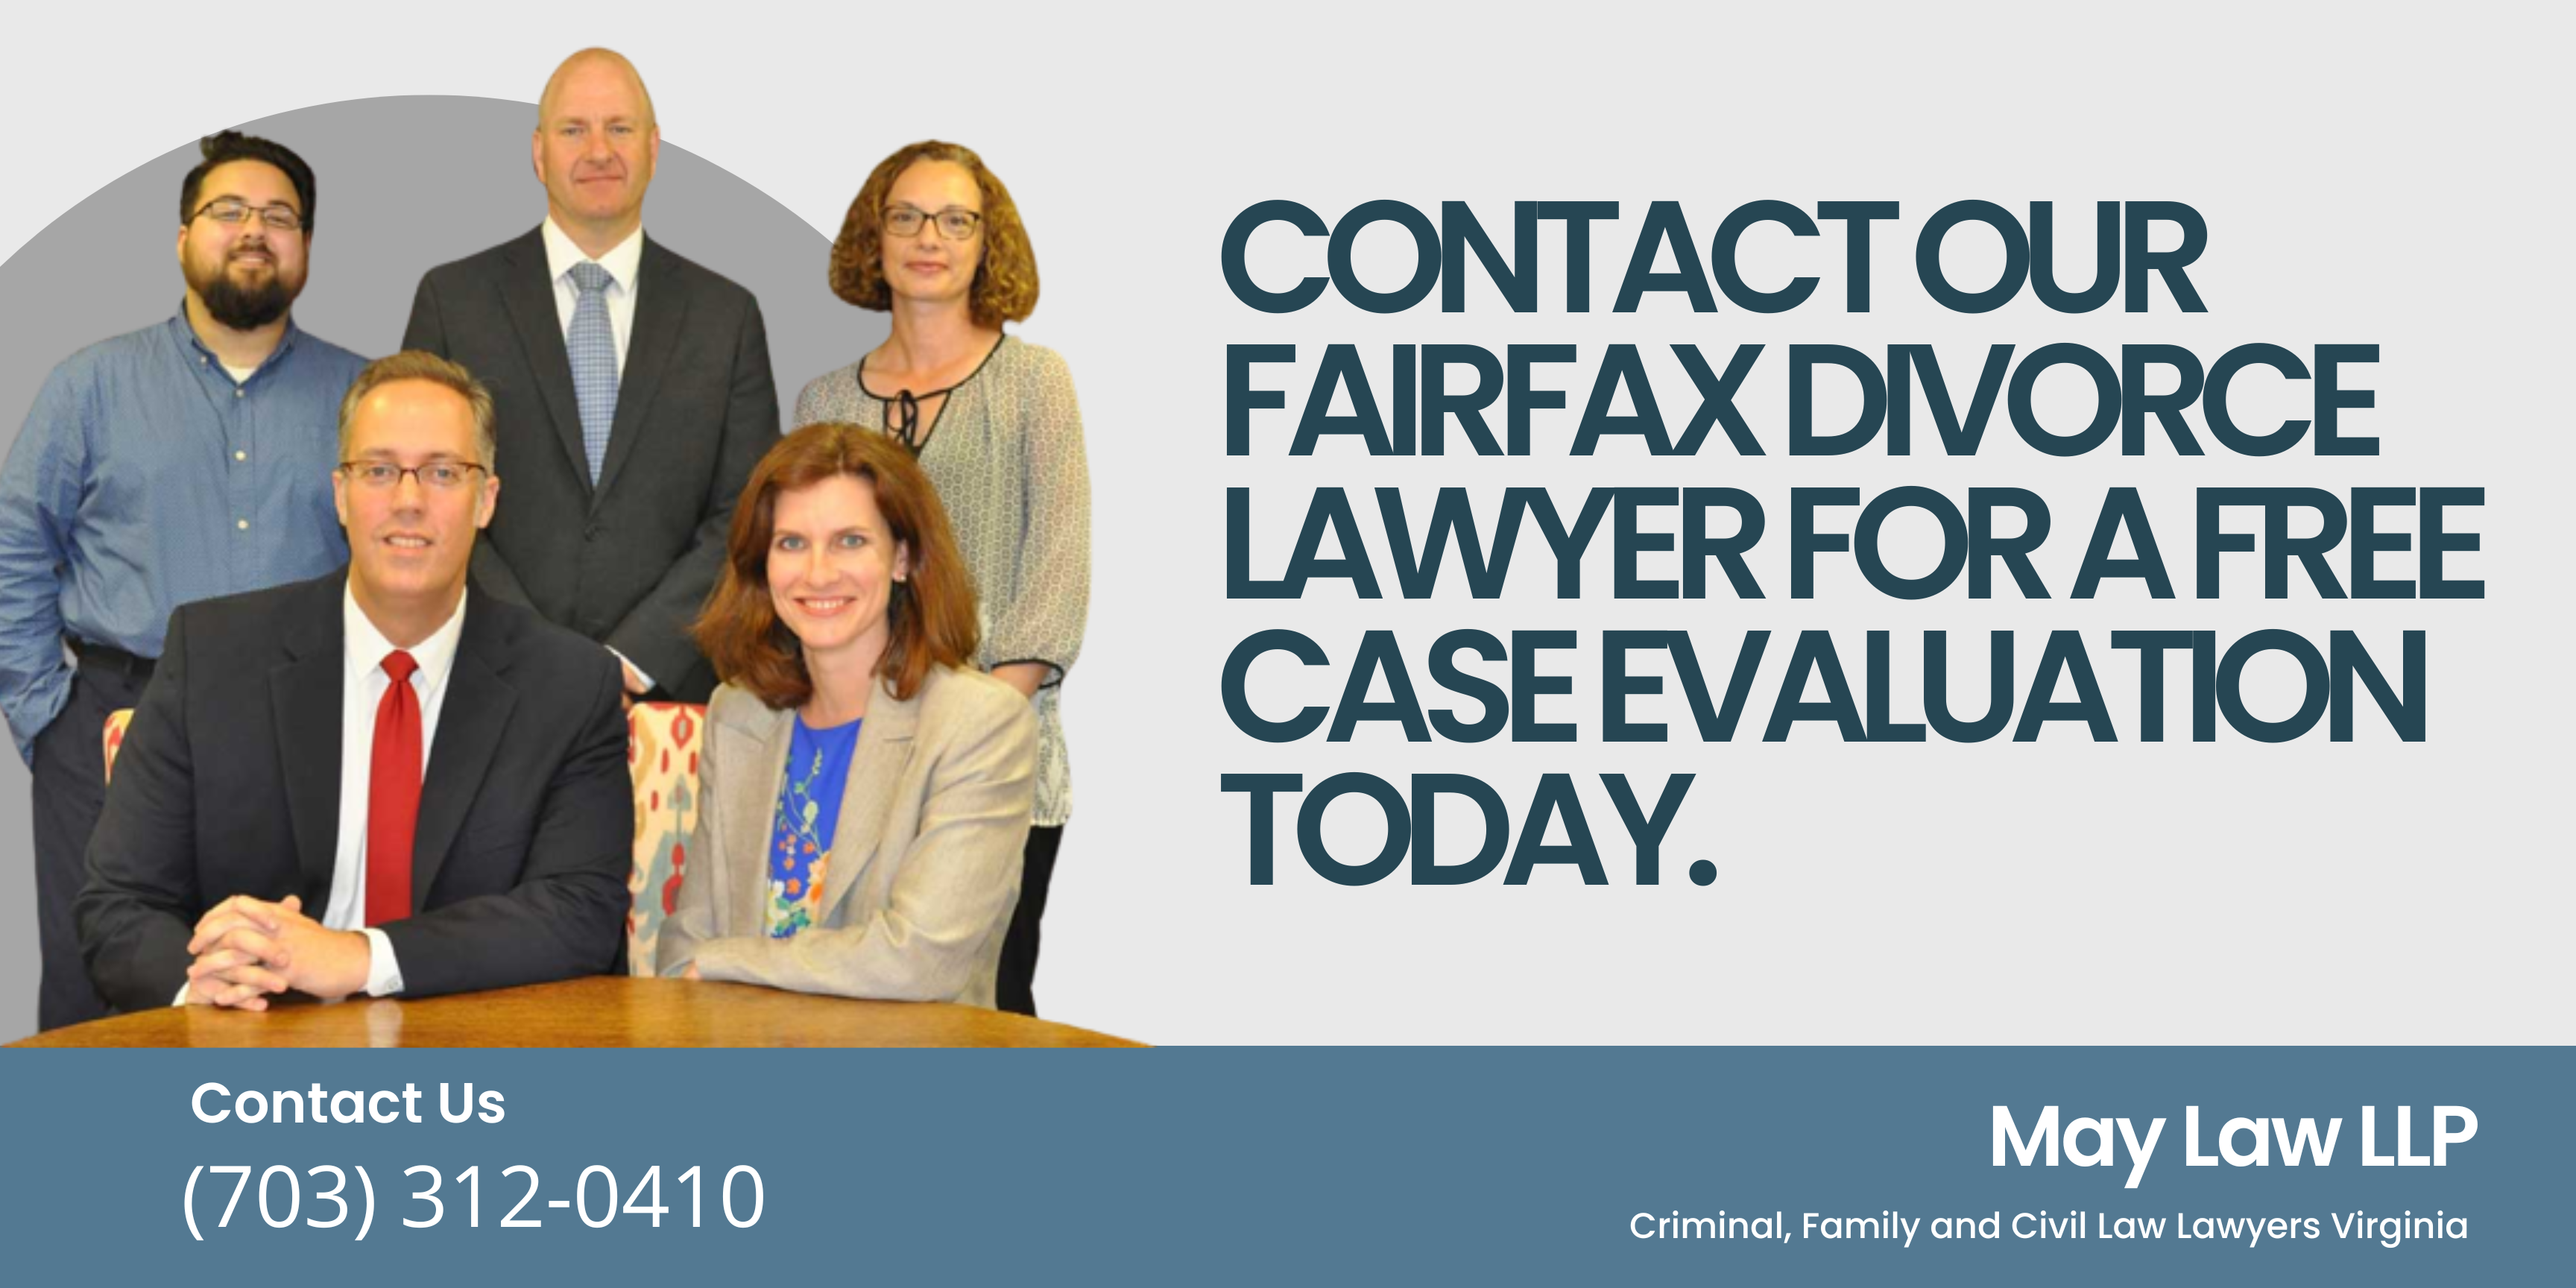 Contact Our Fairfax Divorce lawyer